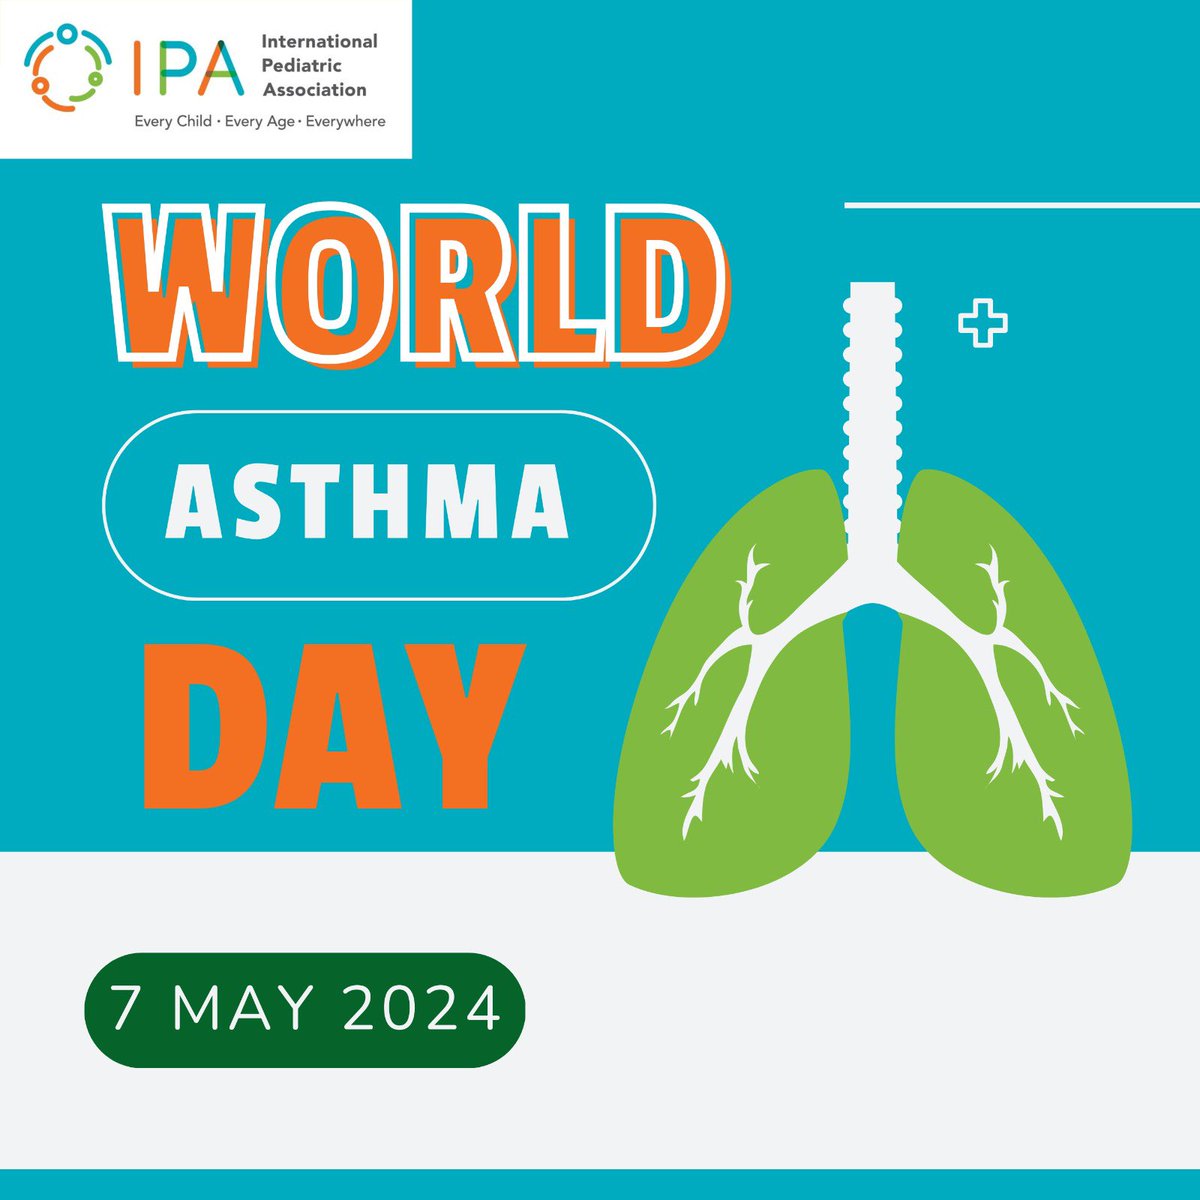 Asthma is a significant global health concern, affecting millions of children and their families, often leading to serious health complications if not managed effectively. Join us in raising awareness and advocating for better asthma management and prevention strategies. #IPA